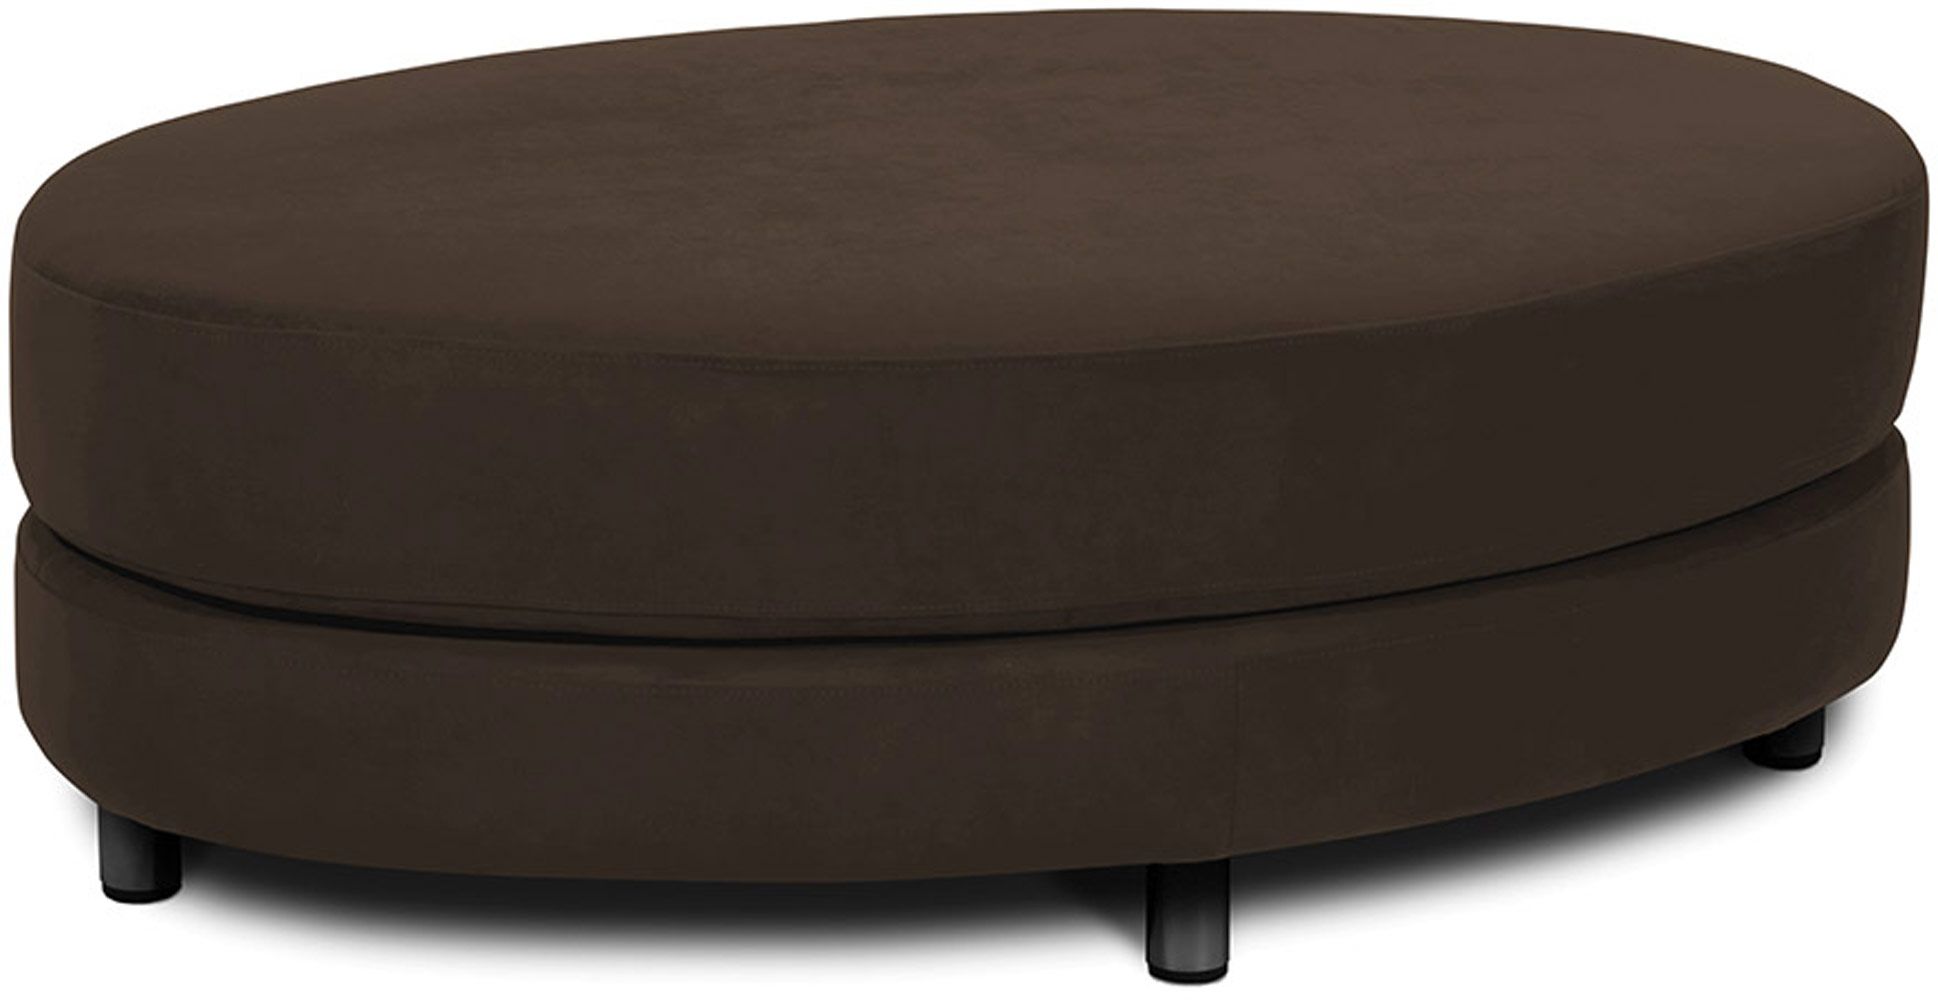 Roundabout Oval Ottoman Chocolate Velvet From The Benches Collection At Regarding Gray Velvet Oval Ottomans (View 1 of 20)